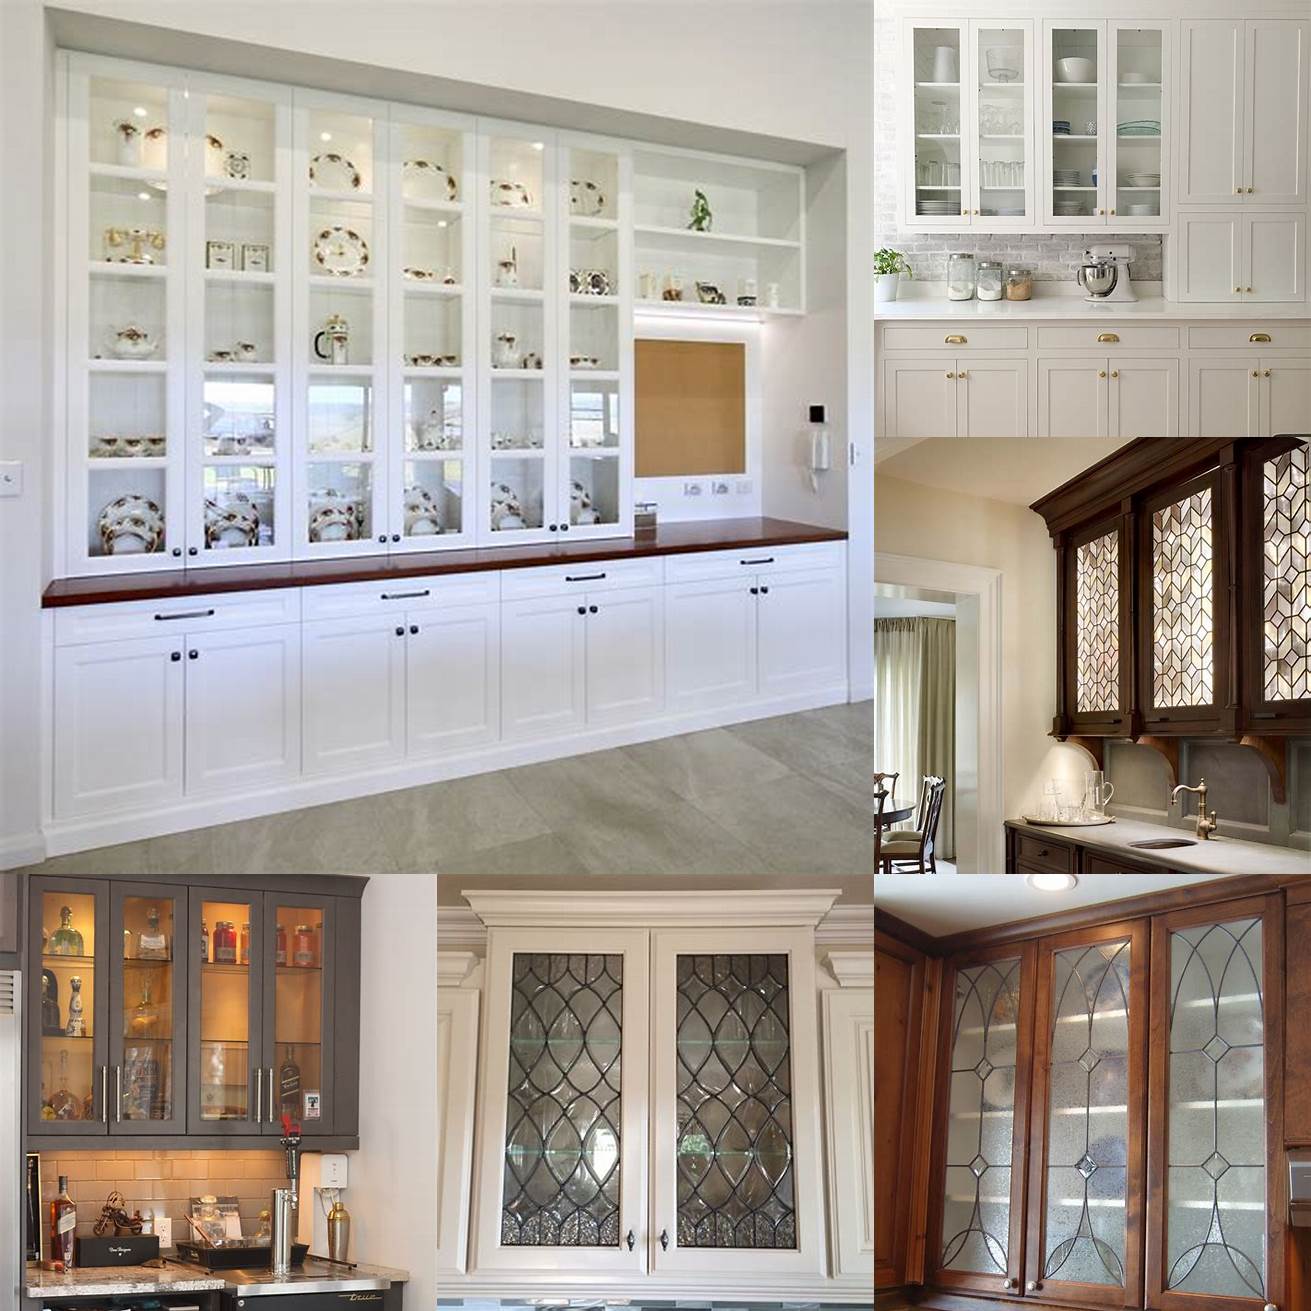 Custom cabinetry with glass doors